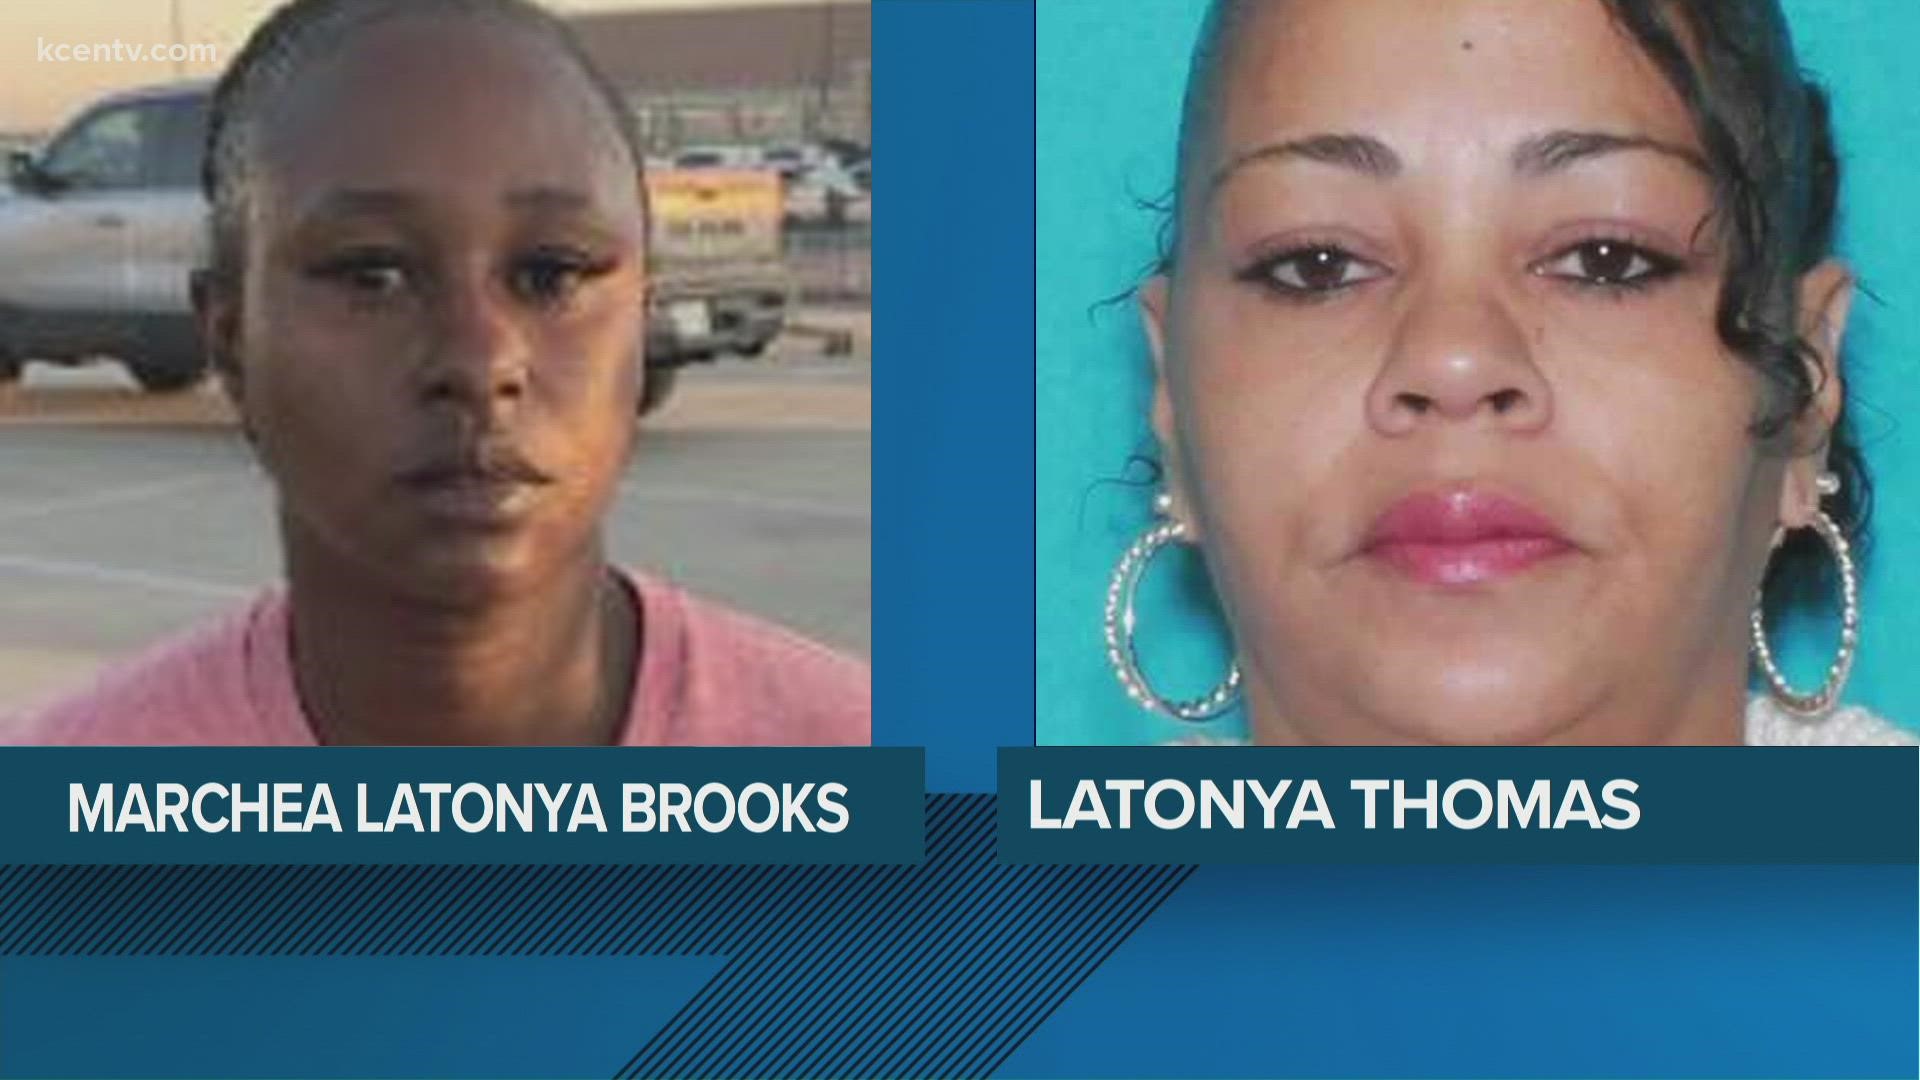 Police say they issued arrest warrants for a 40-year-old and 53-year-old woman. They need your help finding them.